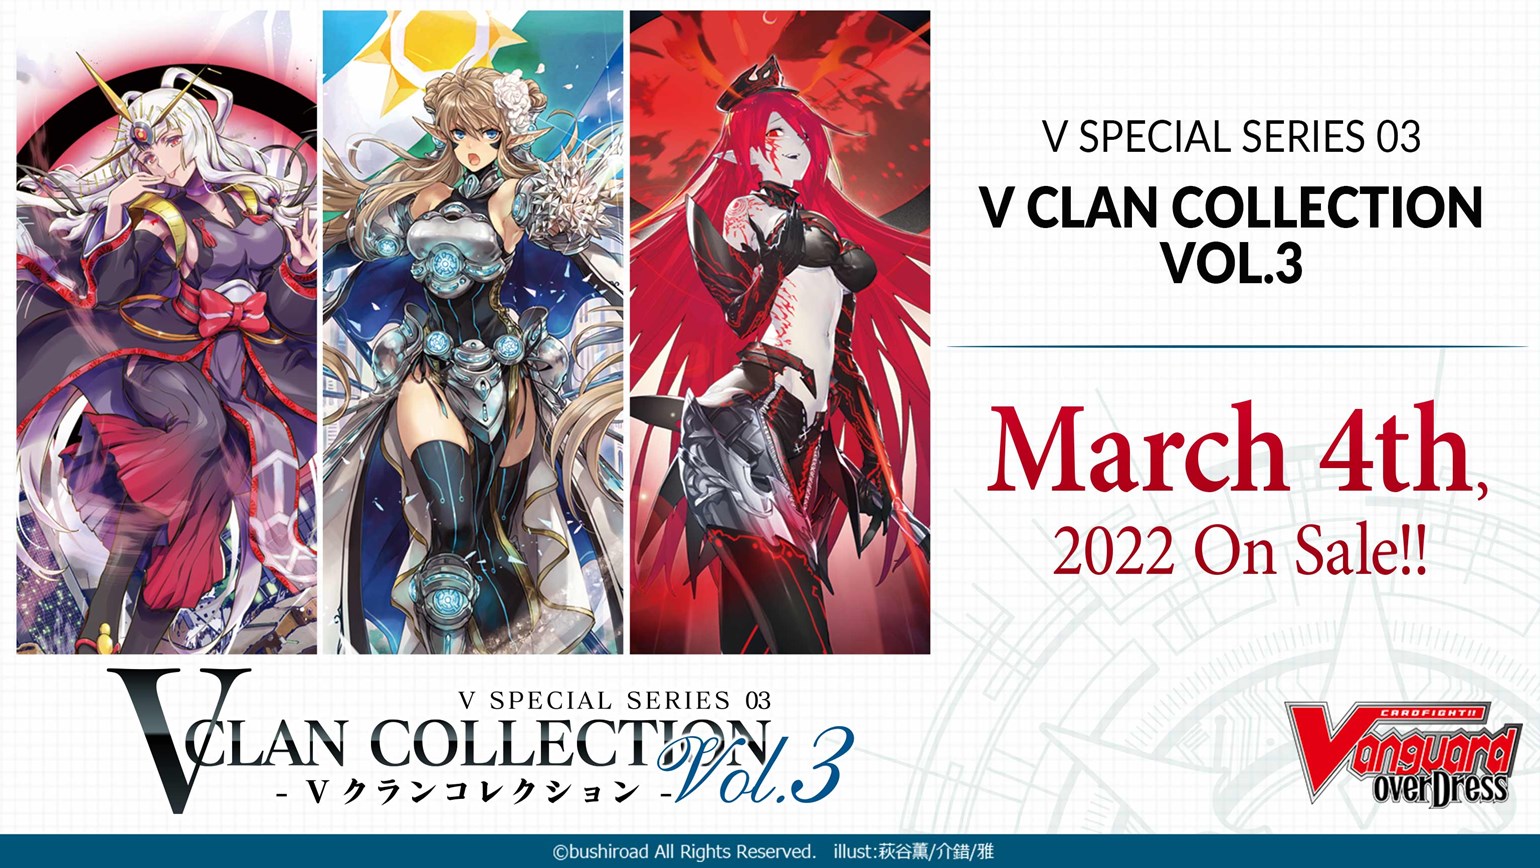 New English Edition overDress V Special Series 03: V Clan Collection Vol.3, Coming to Stores on March 4th!